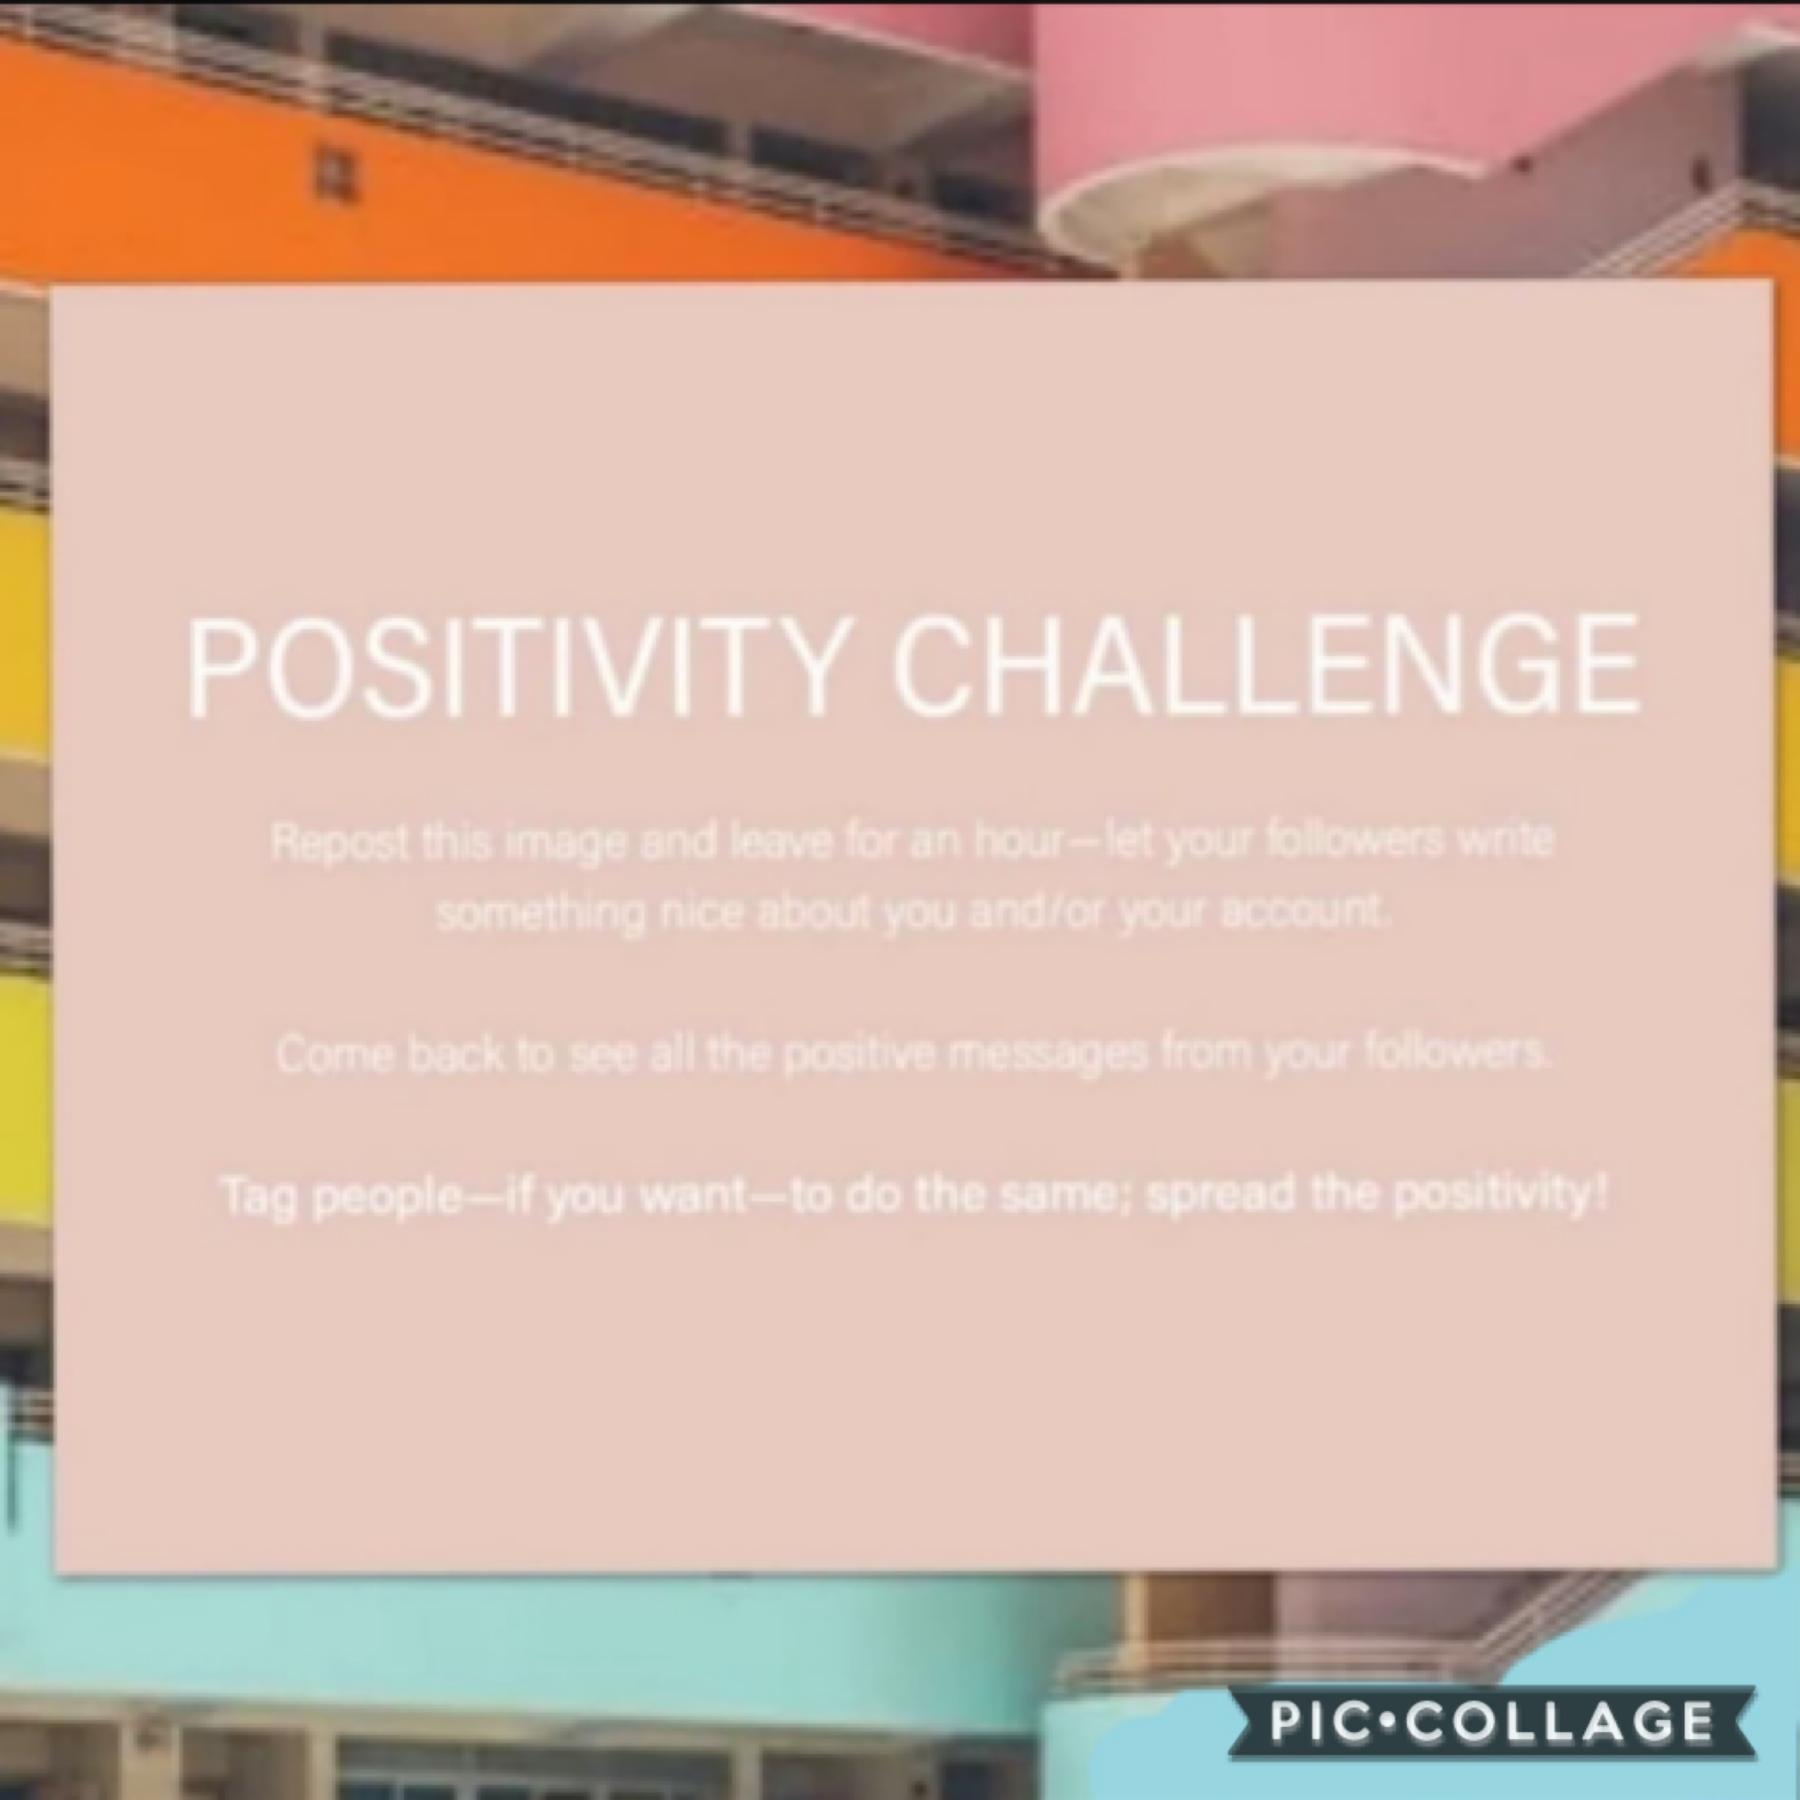 Heyy guys, I’ve seen this going around everywhere and thought lets do this as wel! I think it’s really important to spread as much positivity as we can during these hard periods of time!! ❤️❤️❤️